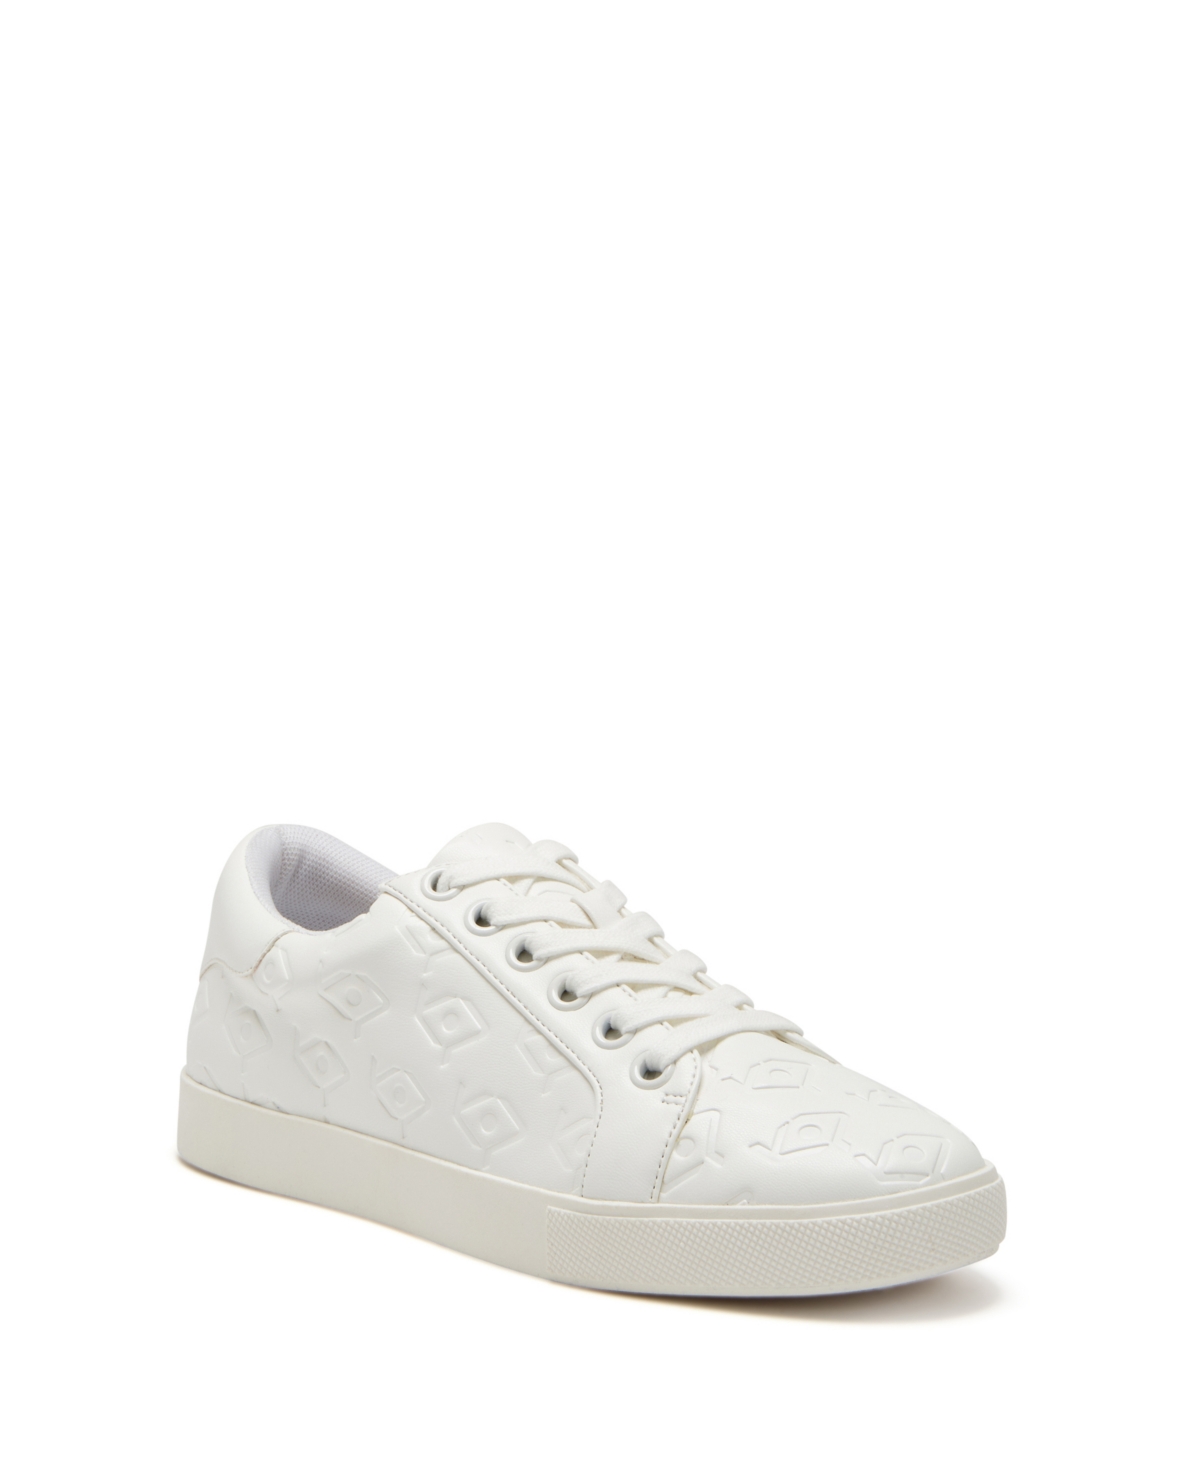 Women's The Rizzo Lace-up Sneaker - Optic White